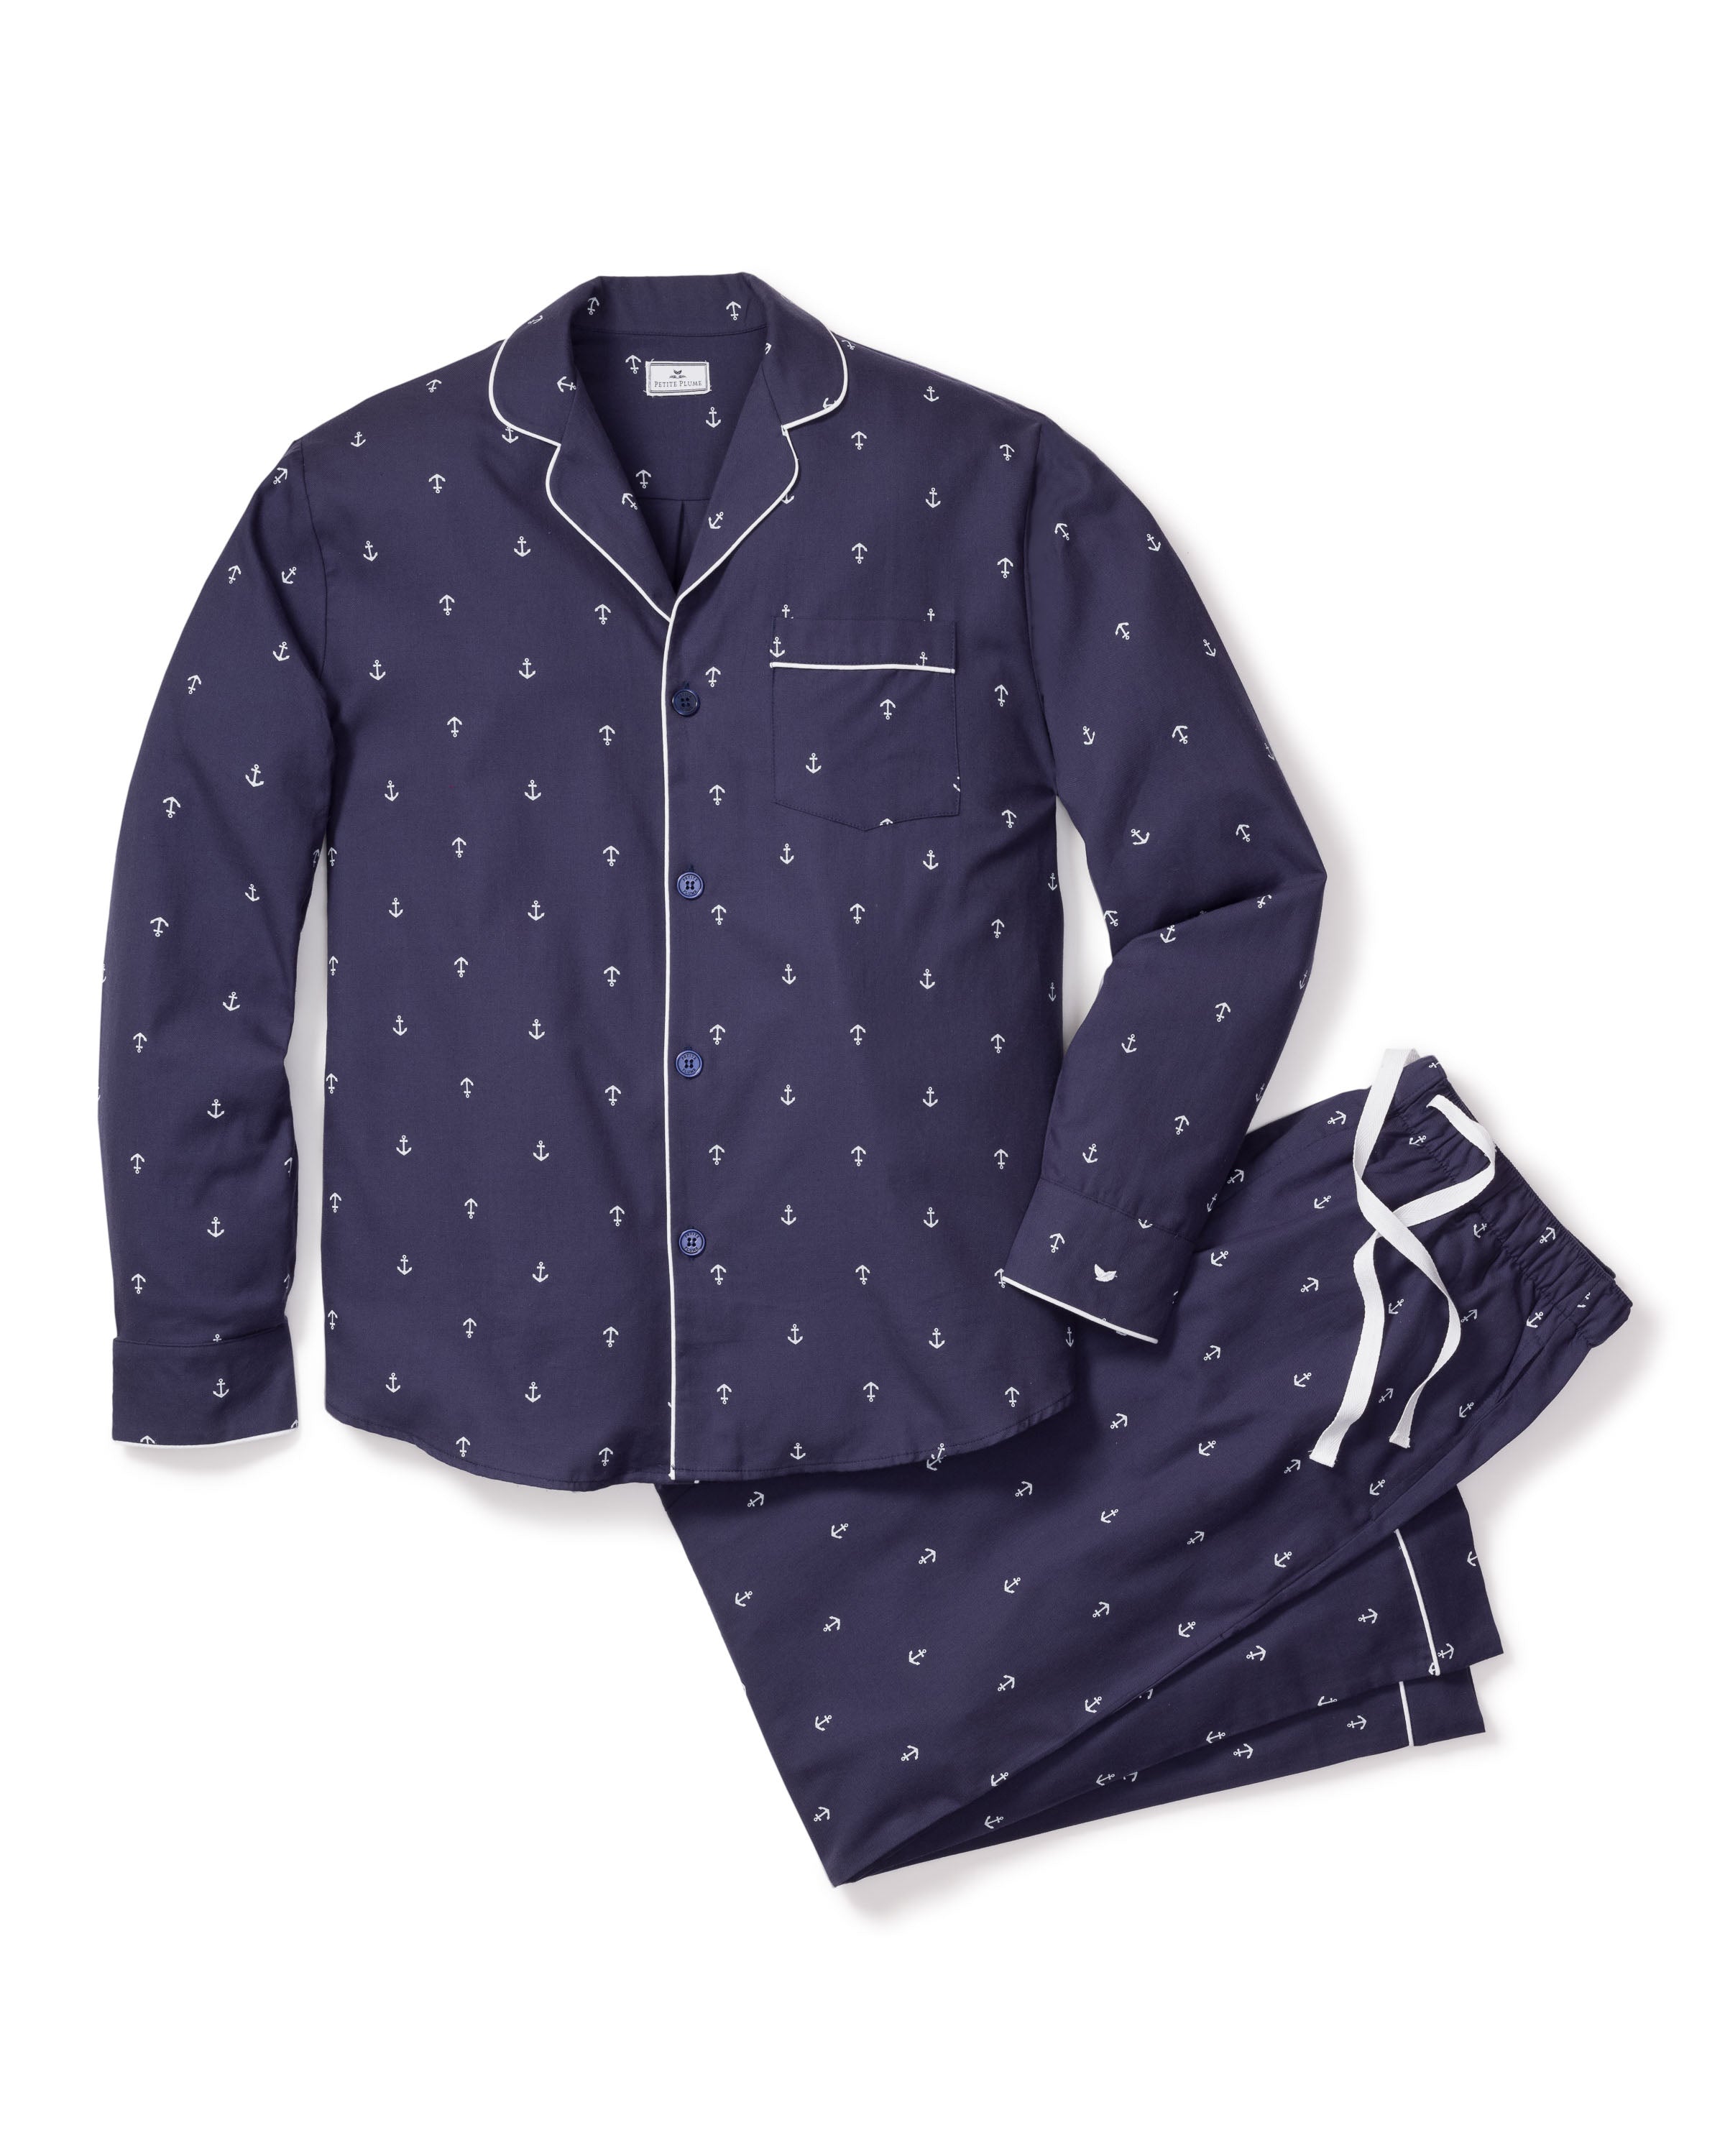 Men's Twill Pajama Set in Portsmouth Anchors